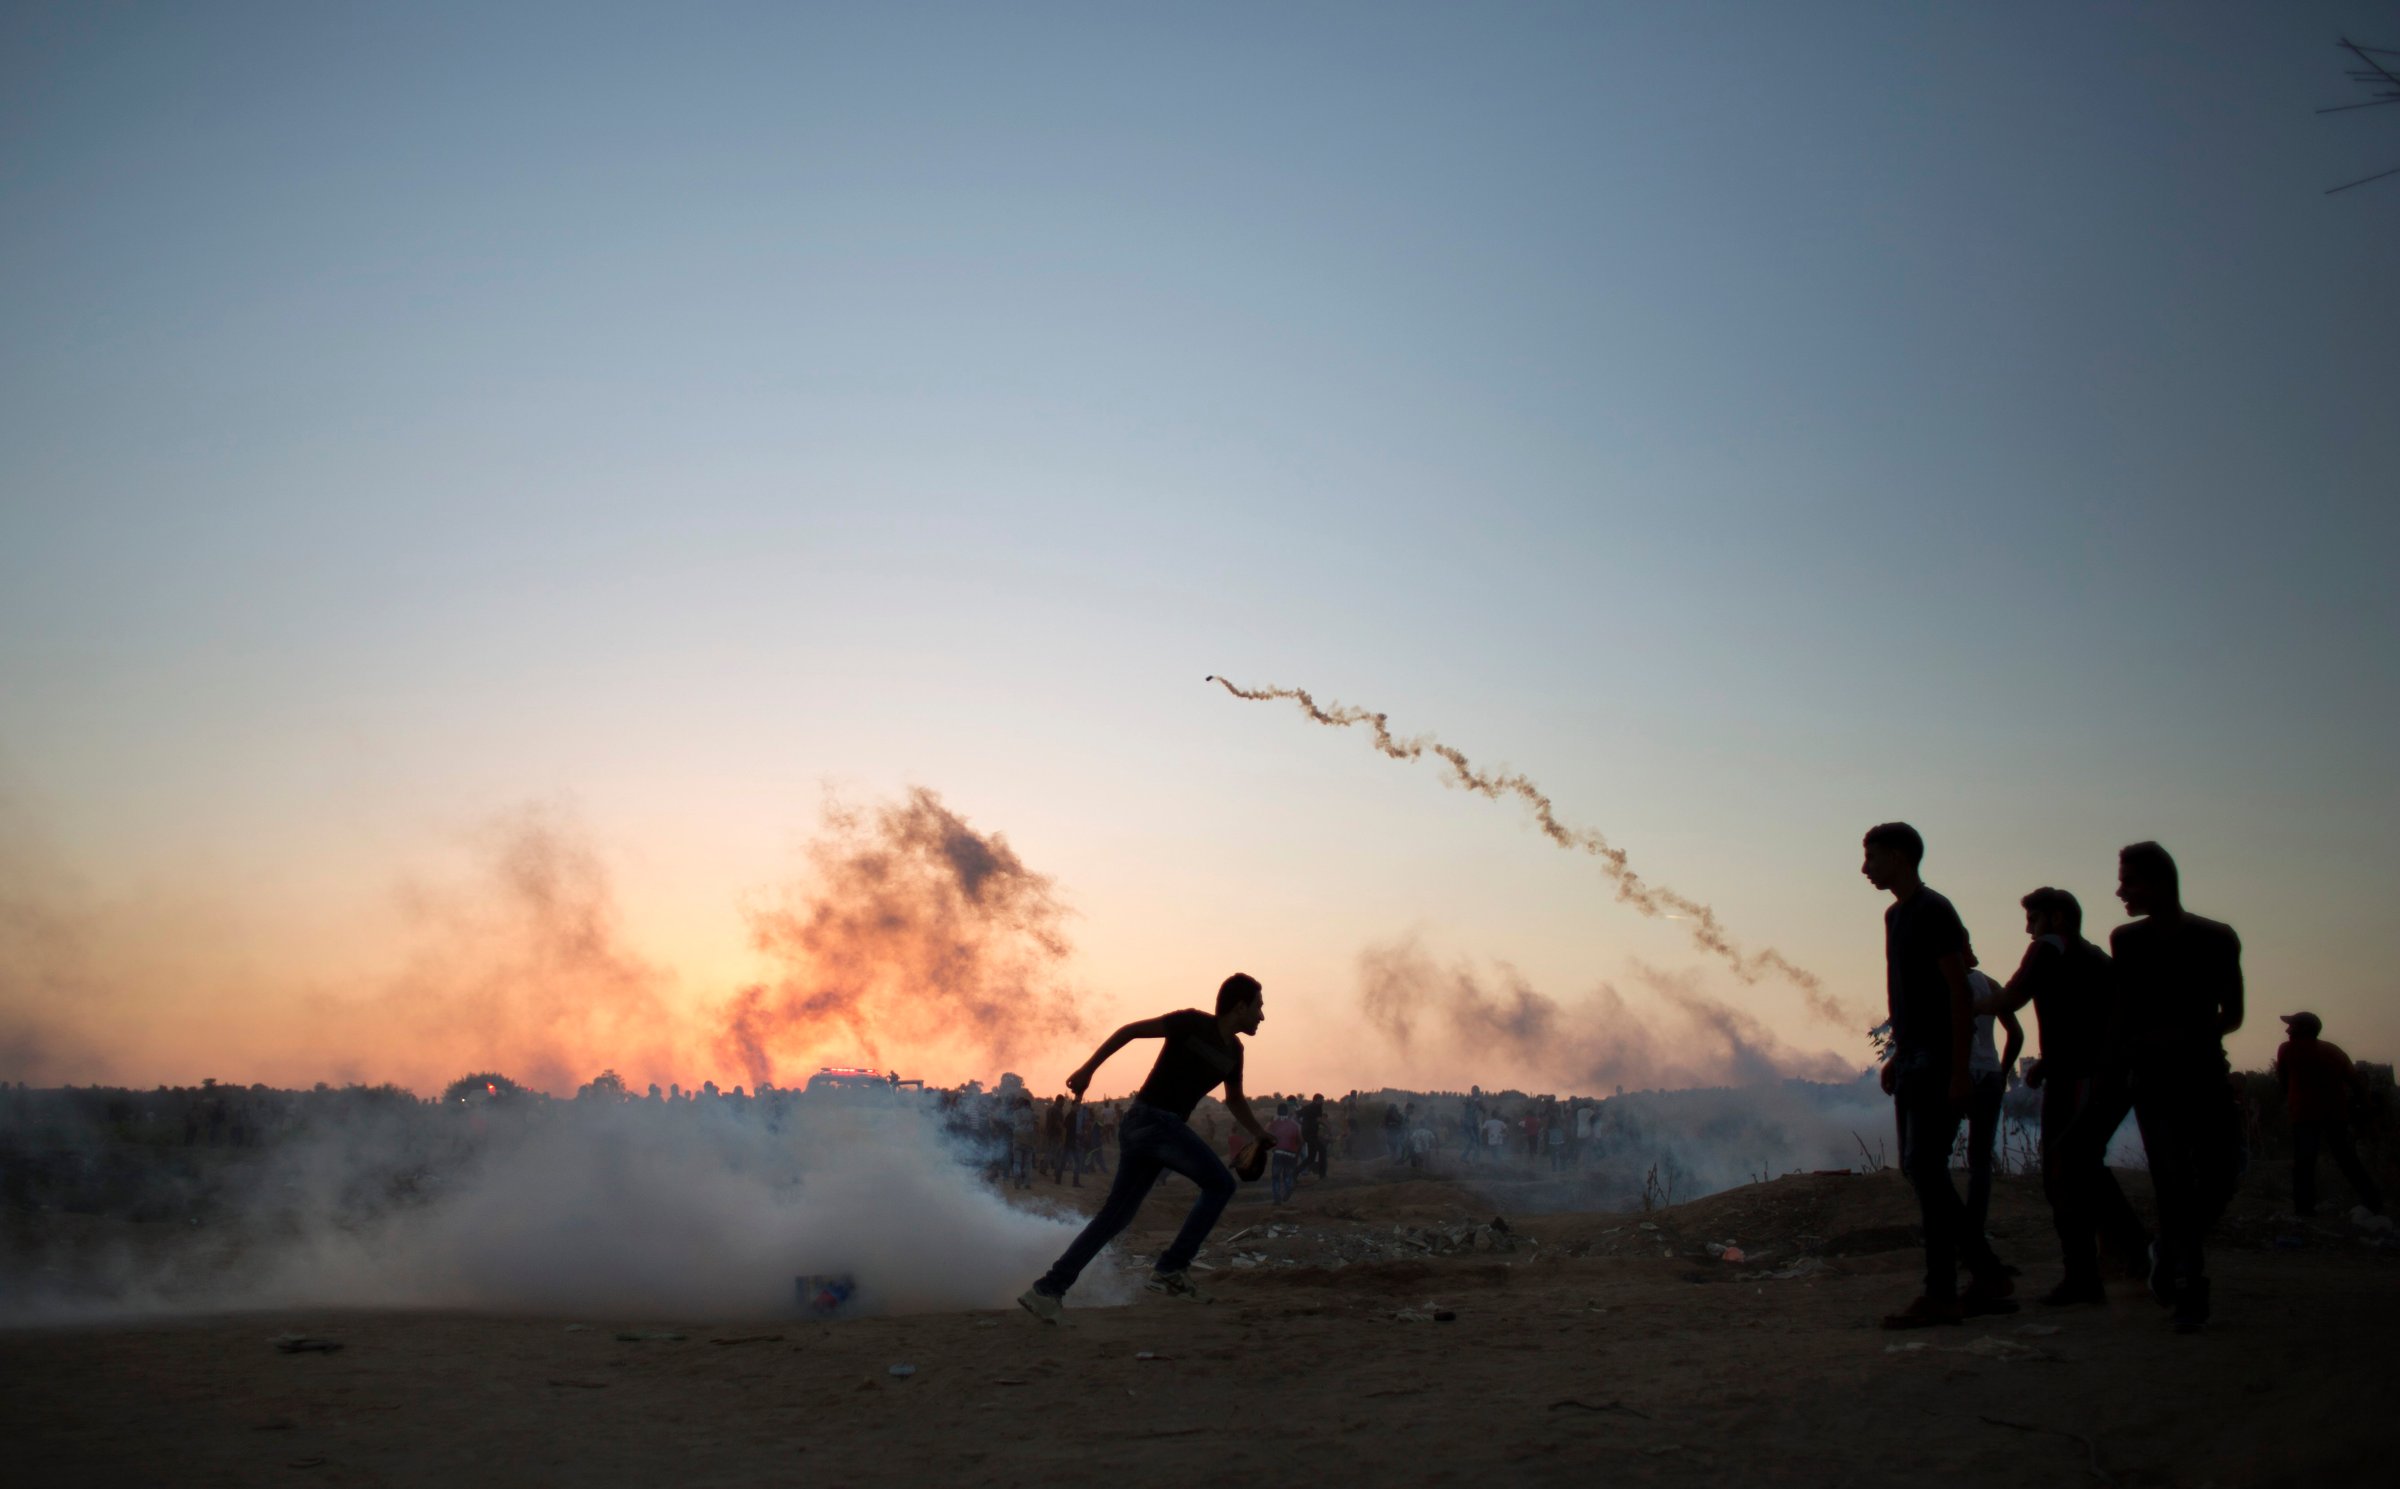 Palestinian protesters run for cover from tear gas fired by Israeli soldiers during clashes on the Israeli border with Gaza in Buriej, central Gaza Strip on Oct. 15, 2015.